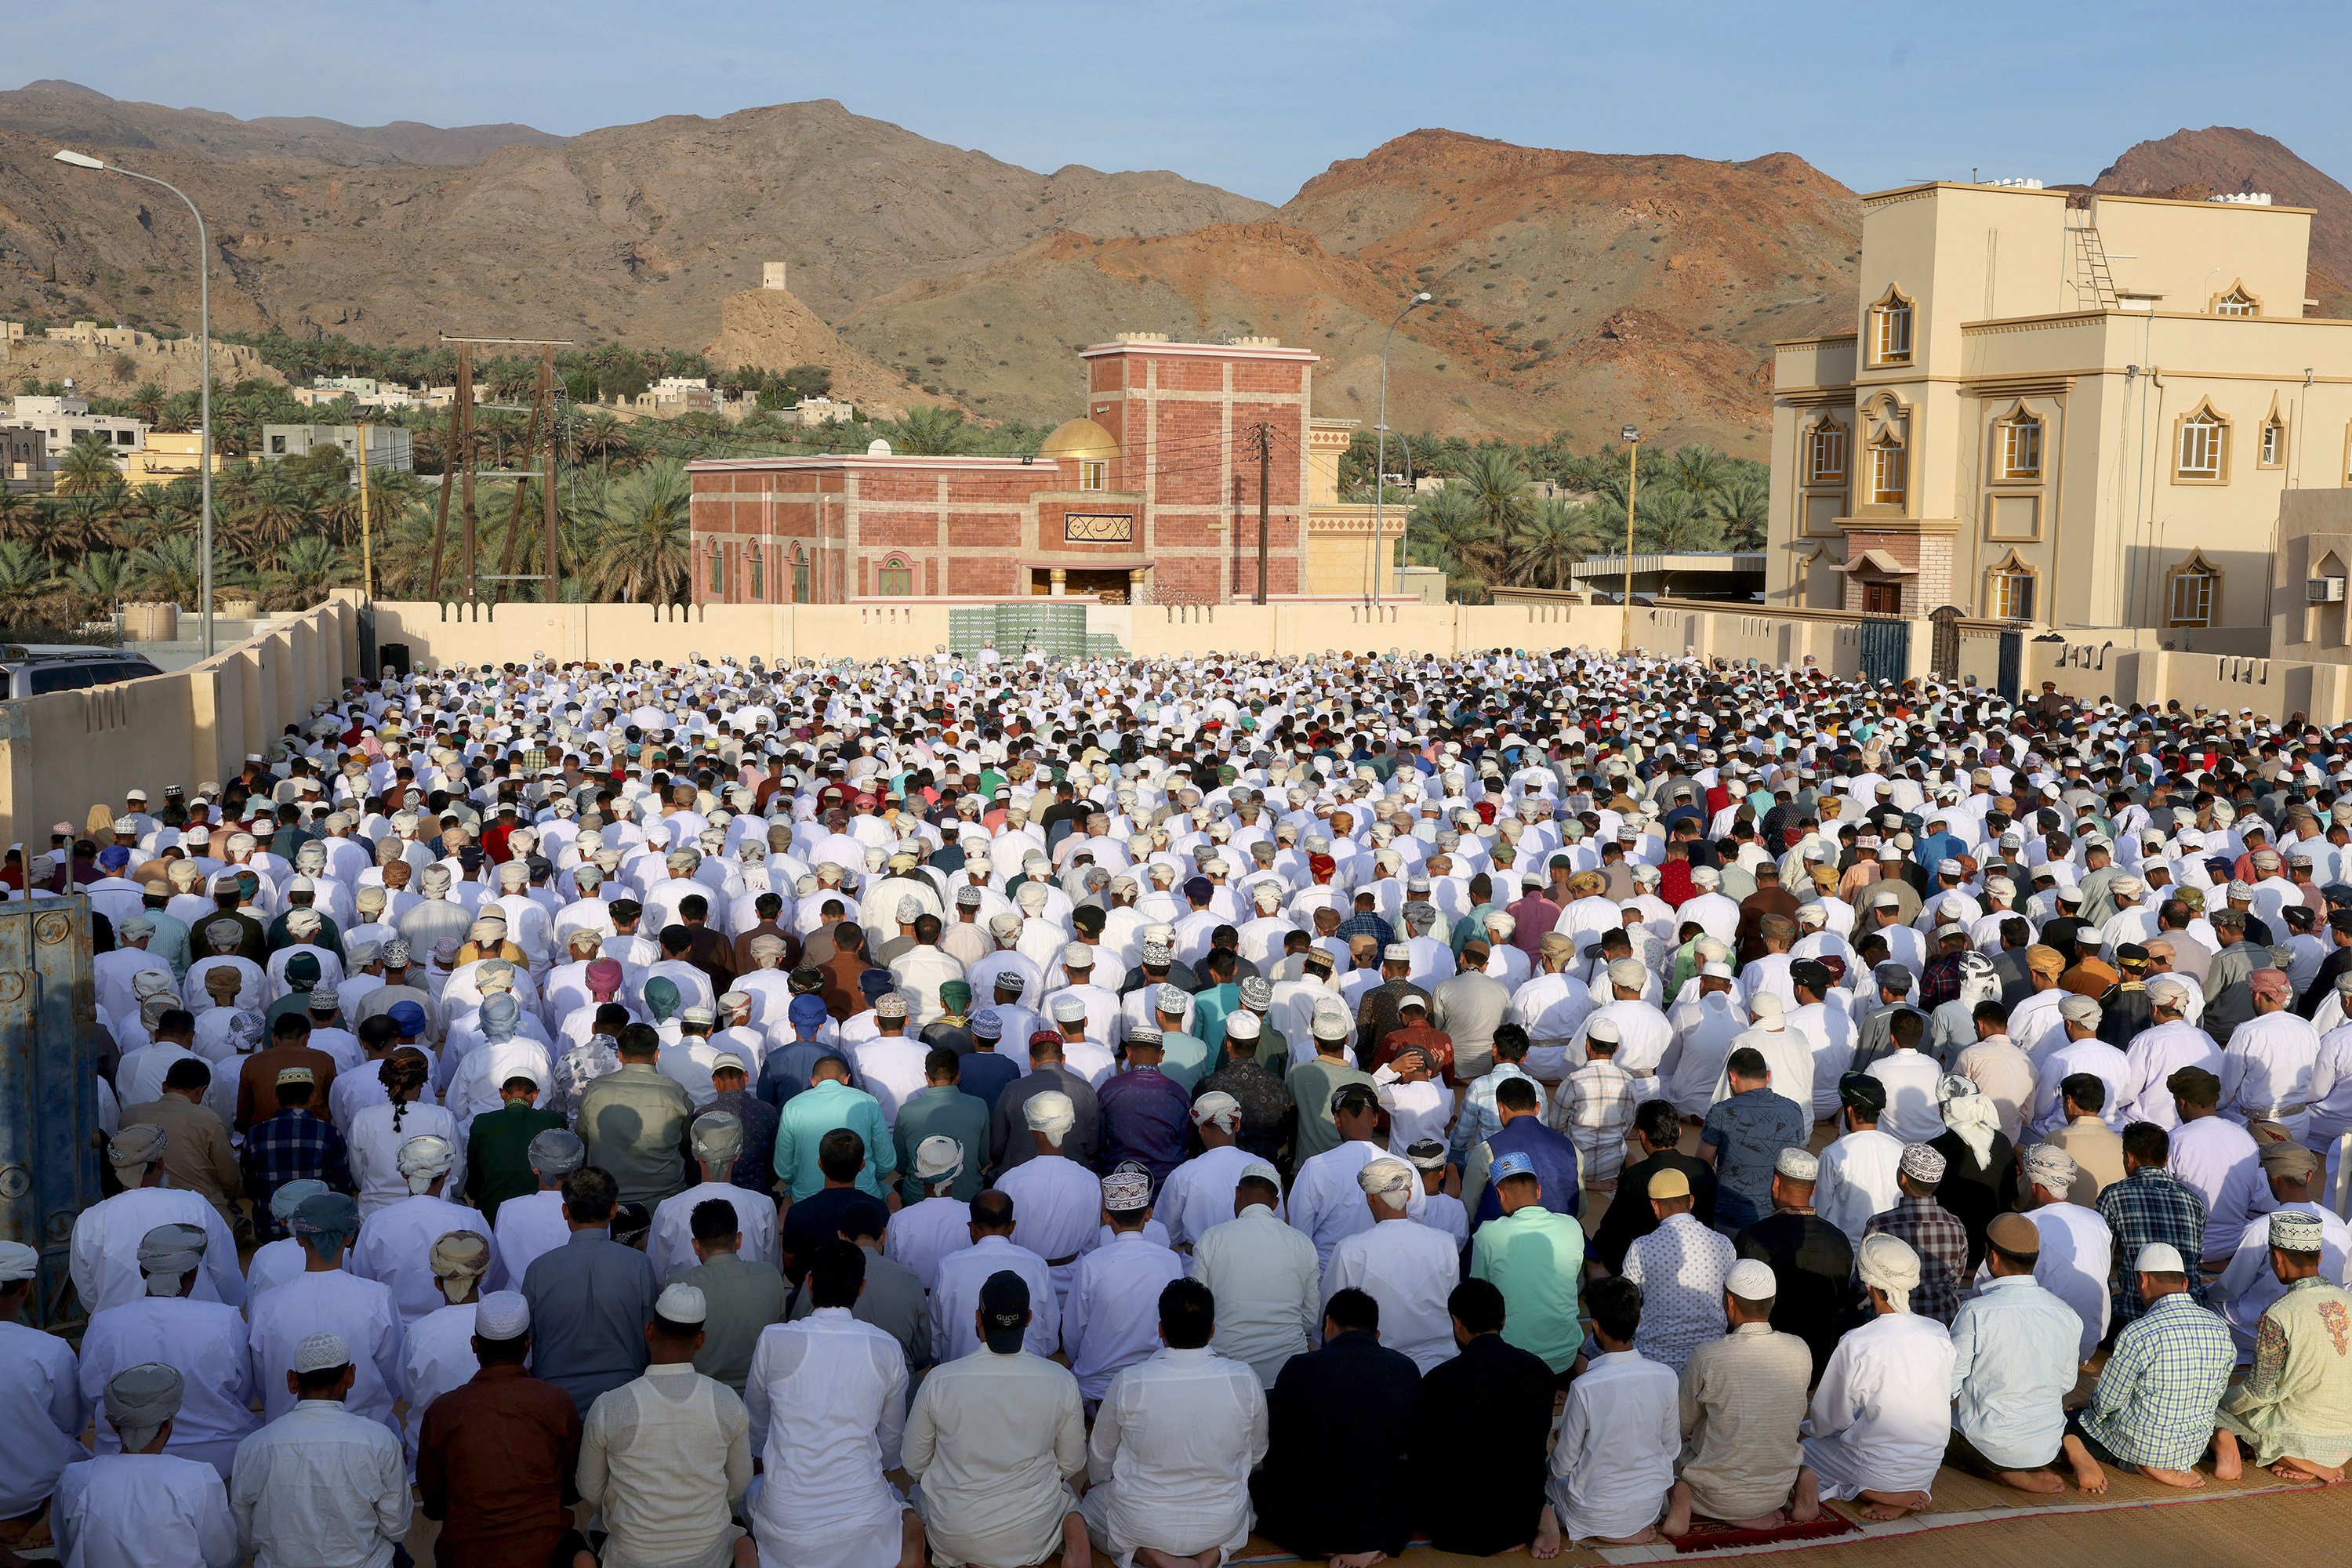 Muslim men perform morning prayer in Oman. Tuesday’s attack stunned the peaceful sultanate. Photo: AFP/Getty Images/TNS